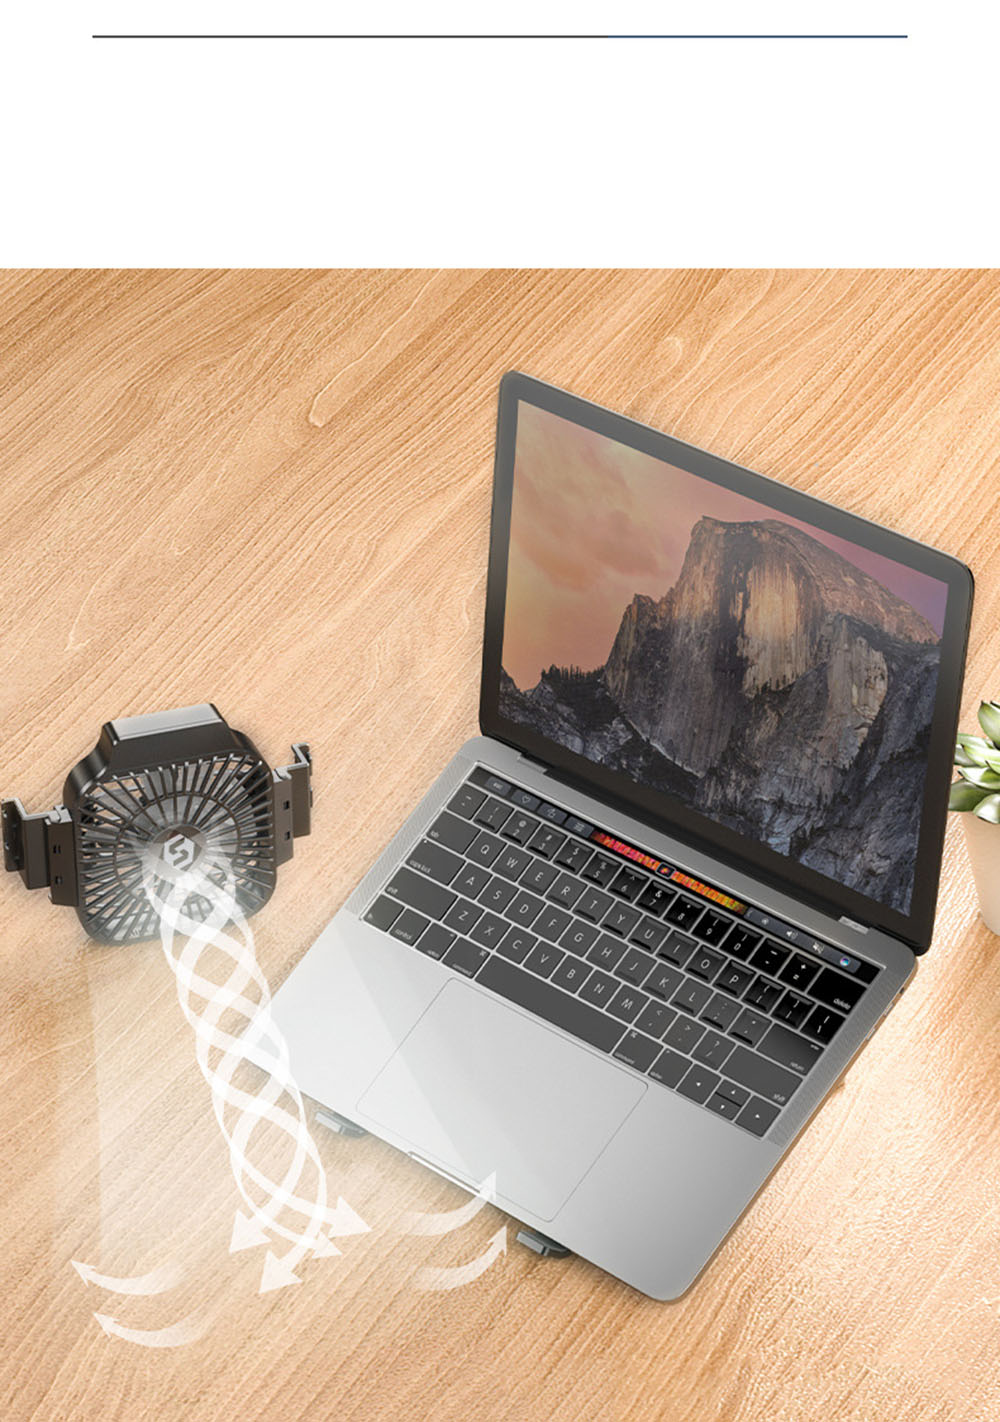 Suohuang-SZJF-054S2-Notebook-Computer-Laptop-Stand-Cooling-Pad-1-Fans-USB-Adjustable-Heightening-She-1724404-5